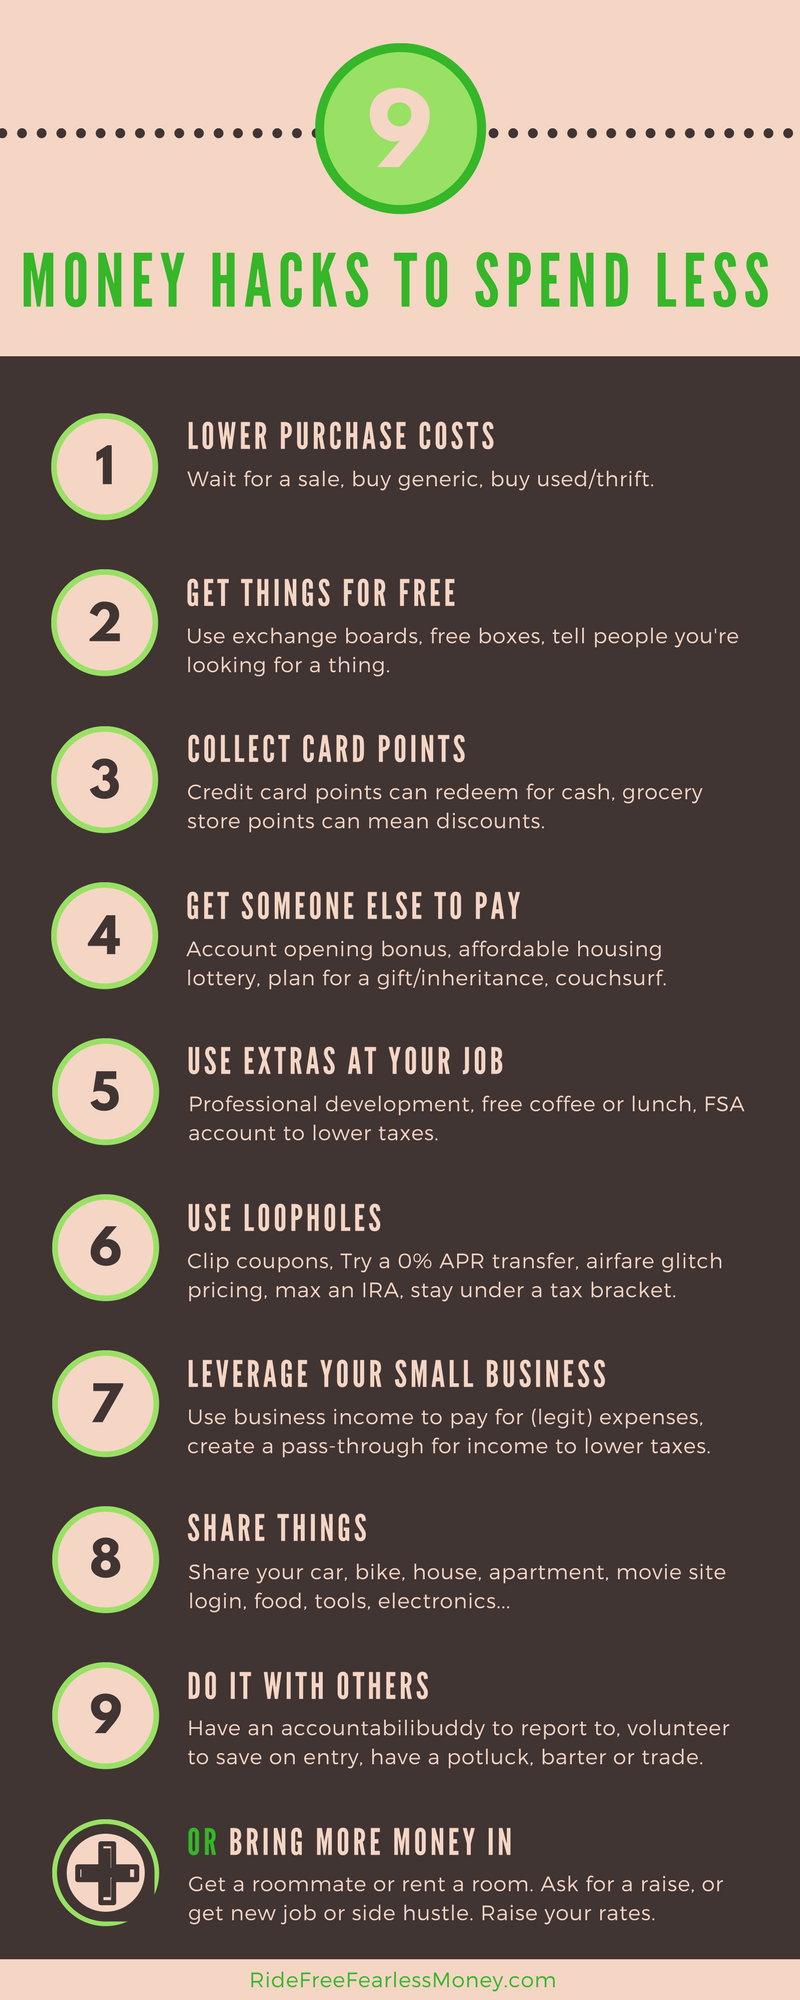 Try These 10 Financial Life Hacks